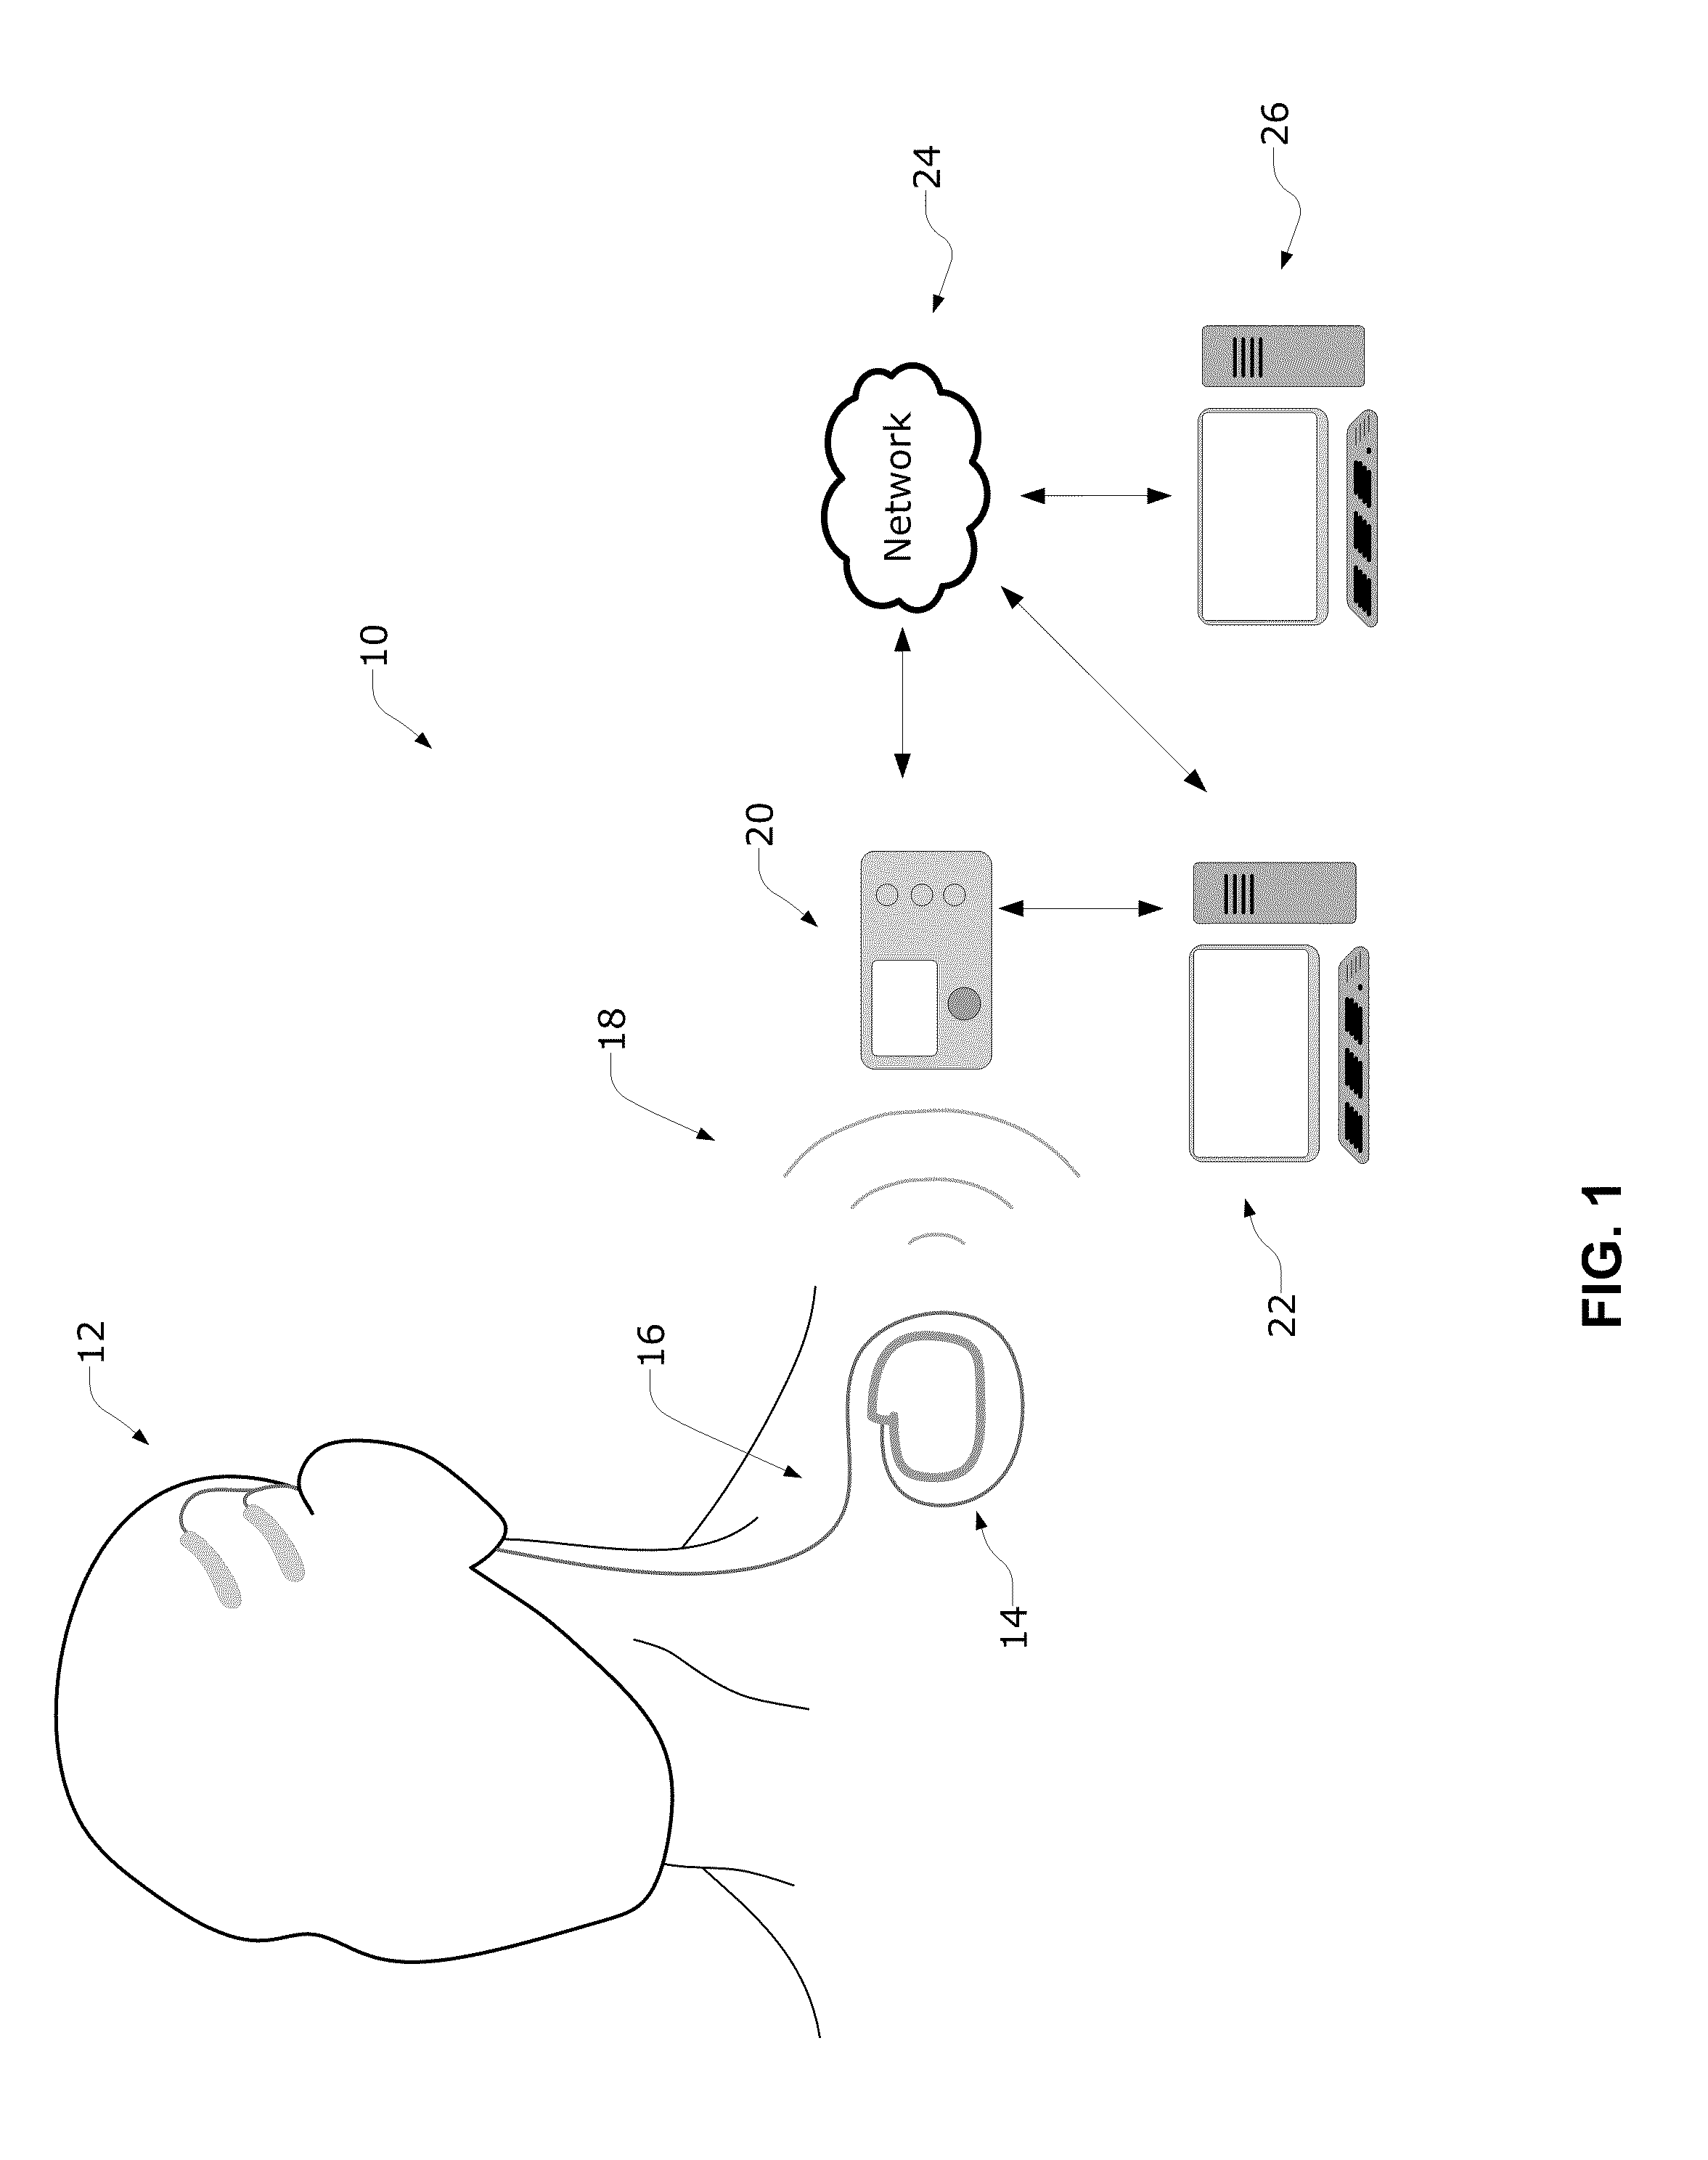 Communication Error Alerting in an Epilepsy Monitoring System